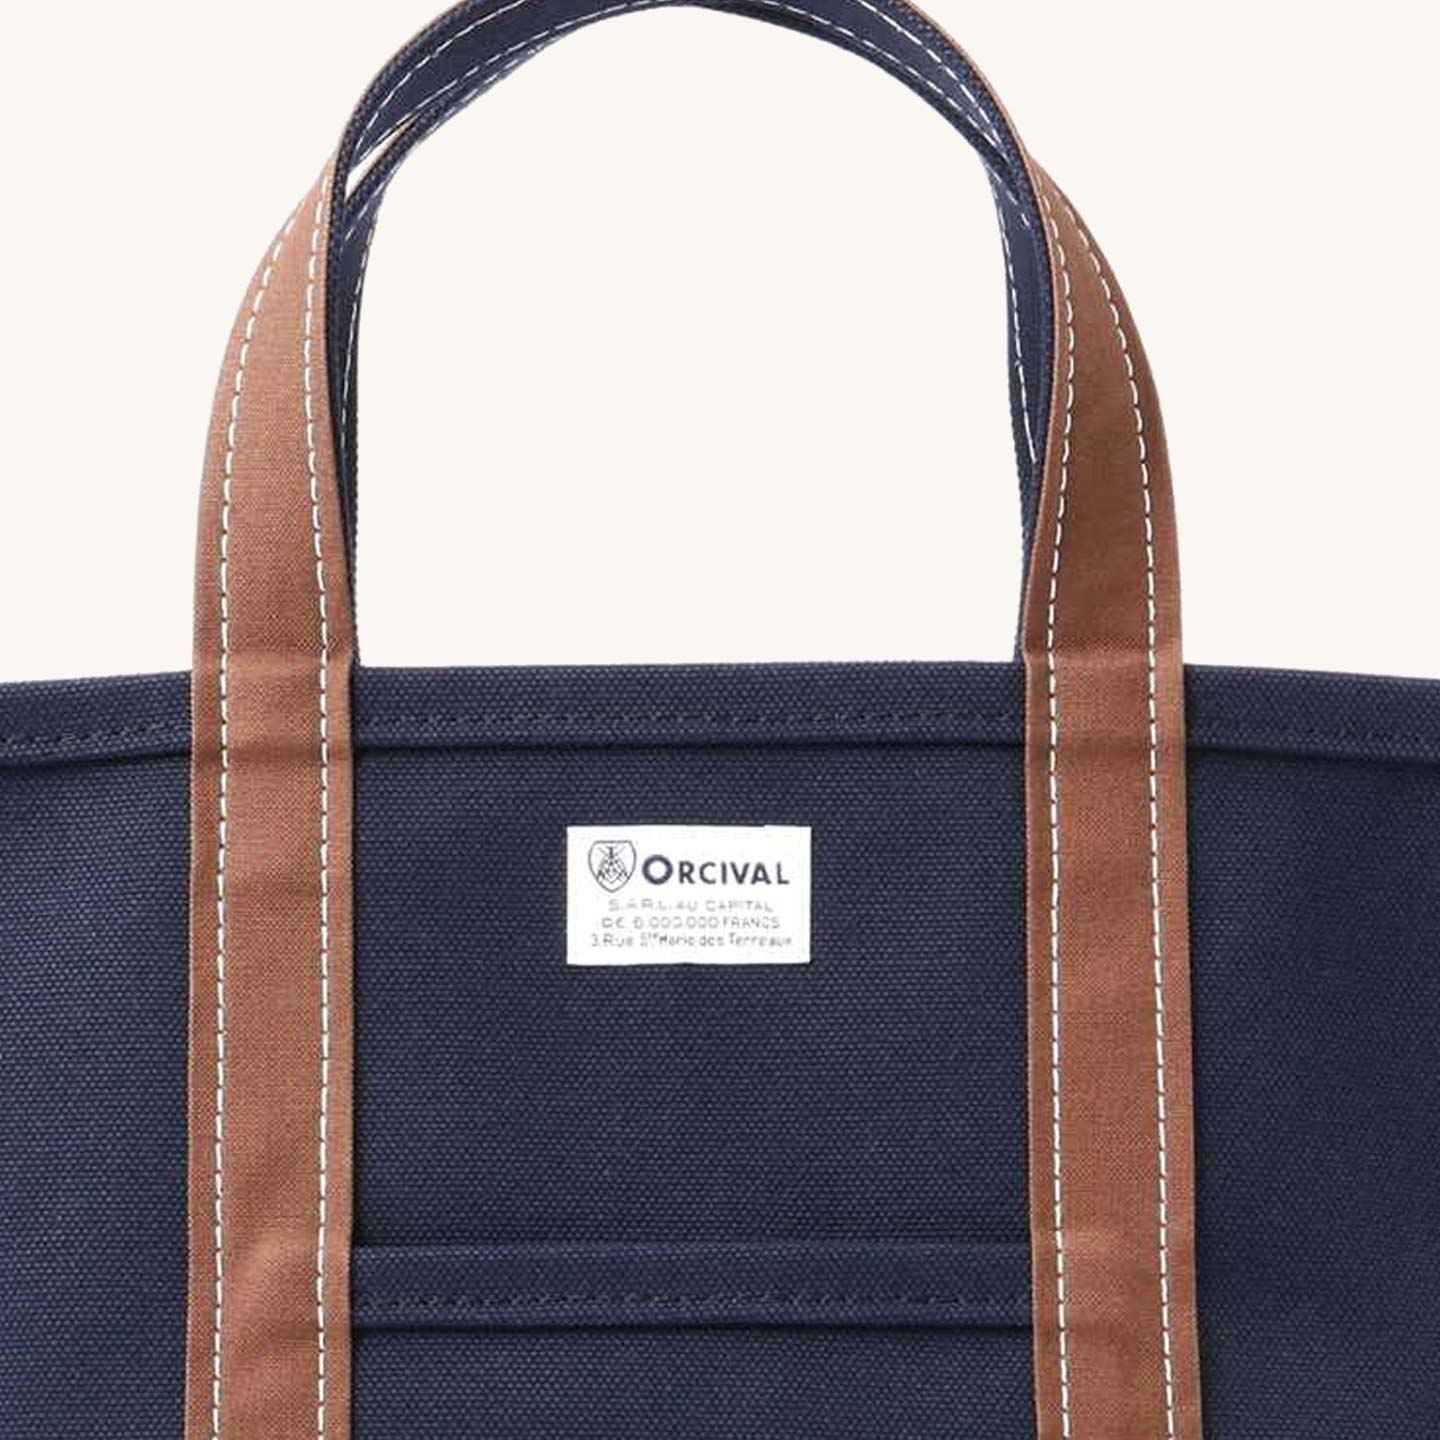 The Marine-Hazelnut tote bag, in a small size, by Orcival